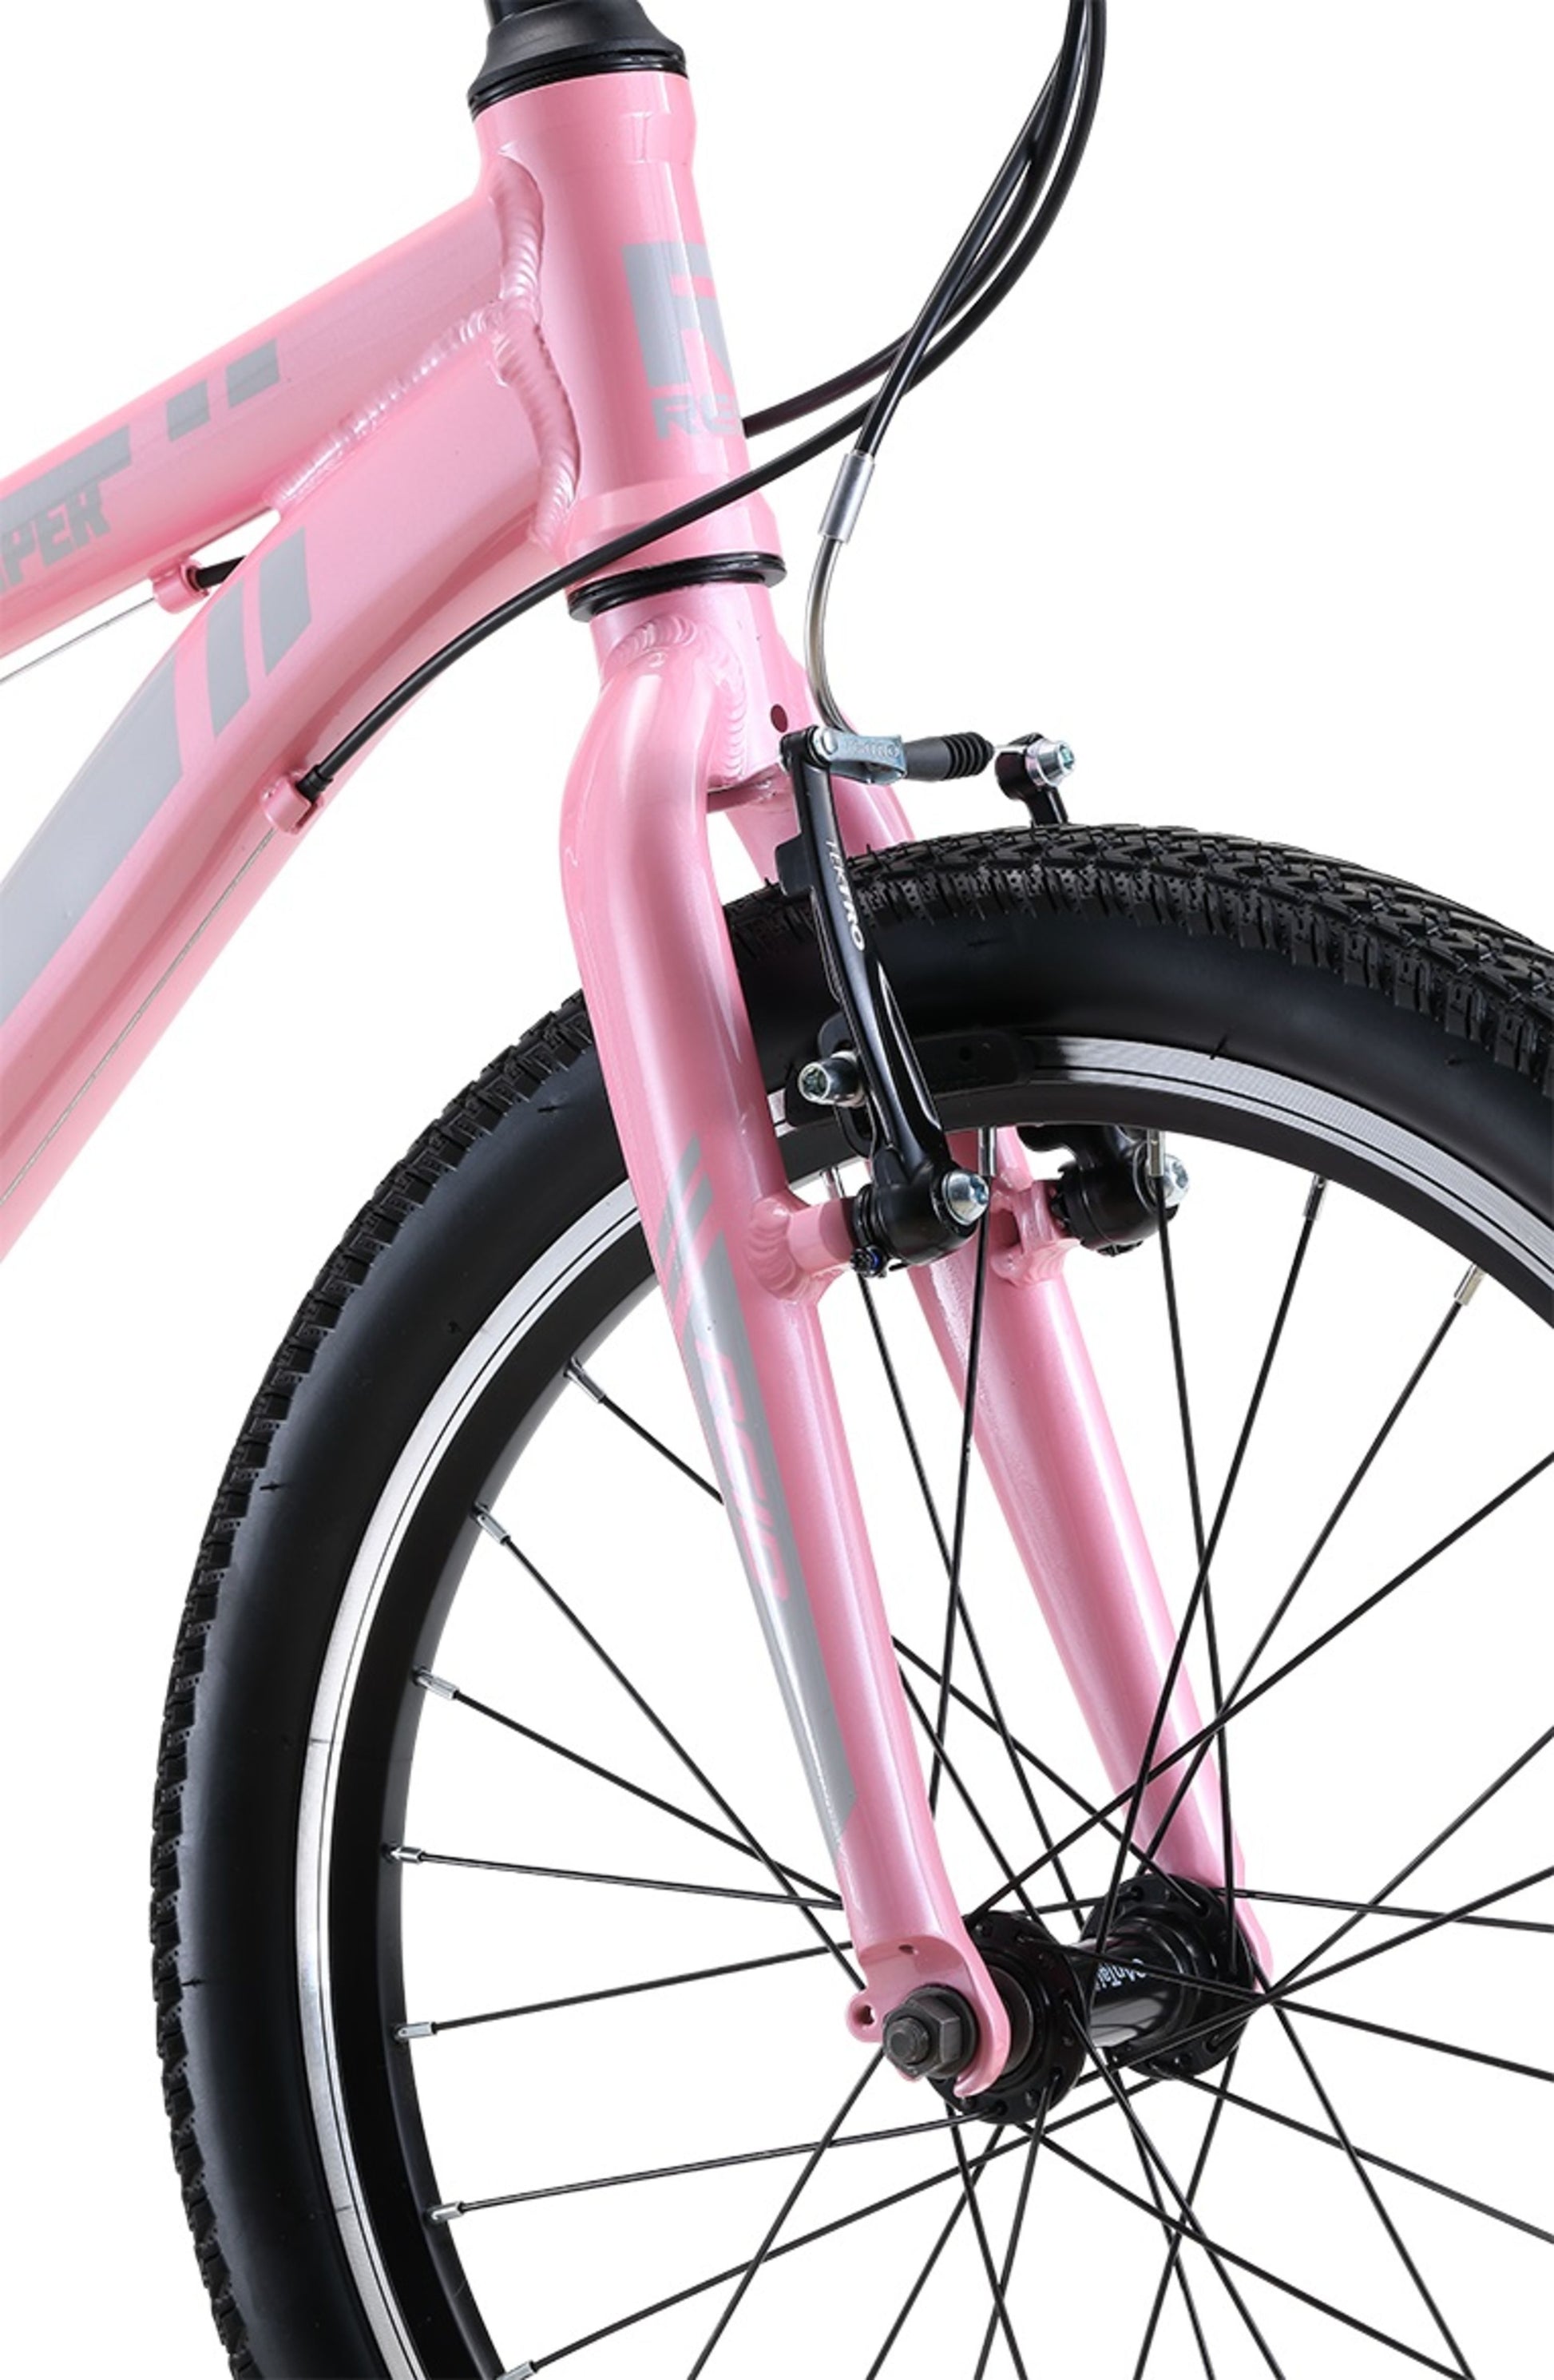 Viper 20" Kids Bike in Pink showing front v-brakes from Reid Cycles Australia 